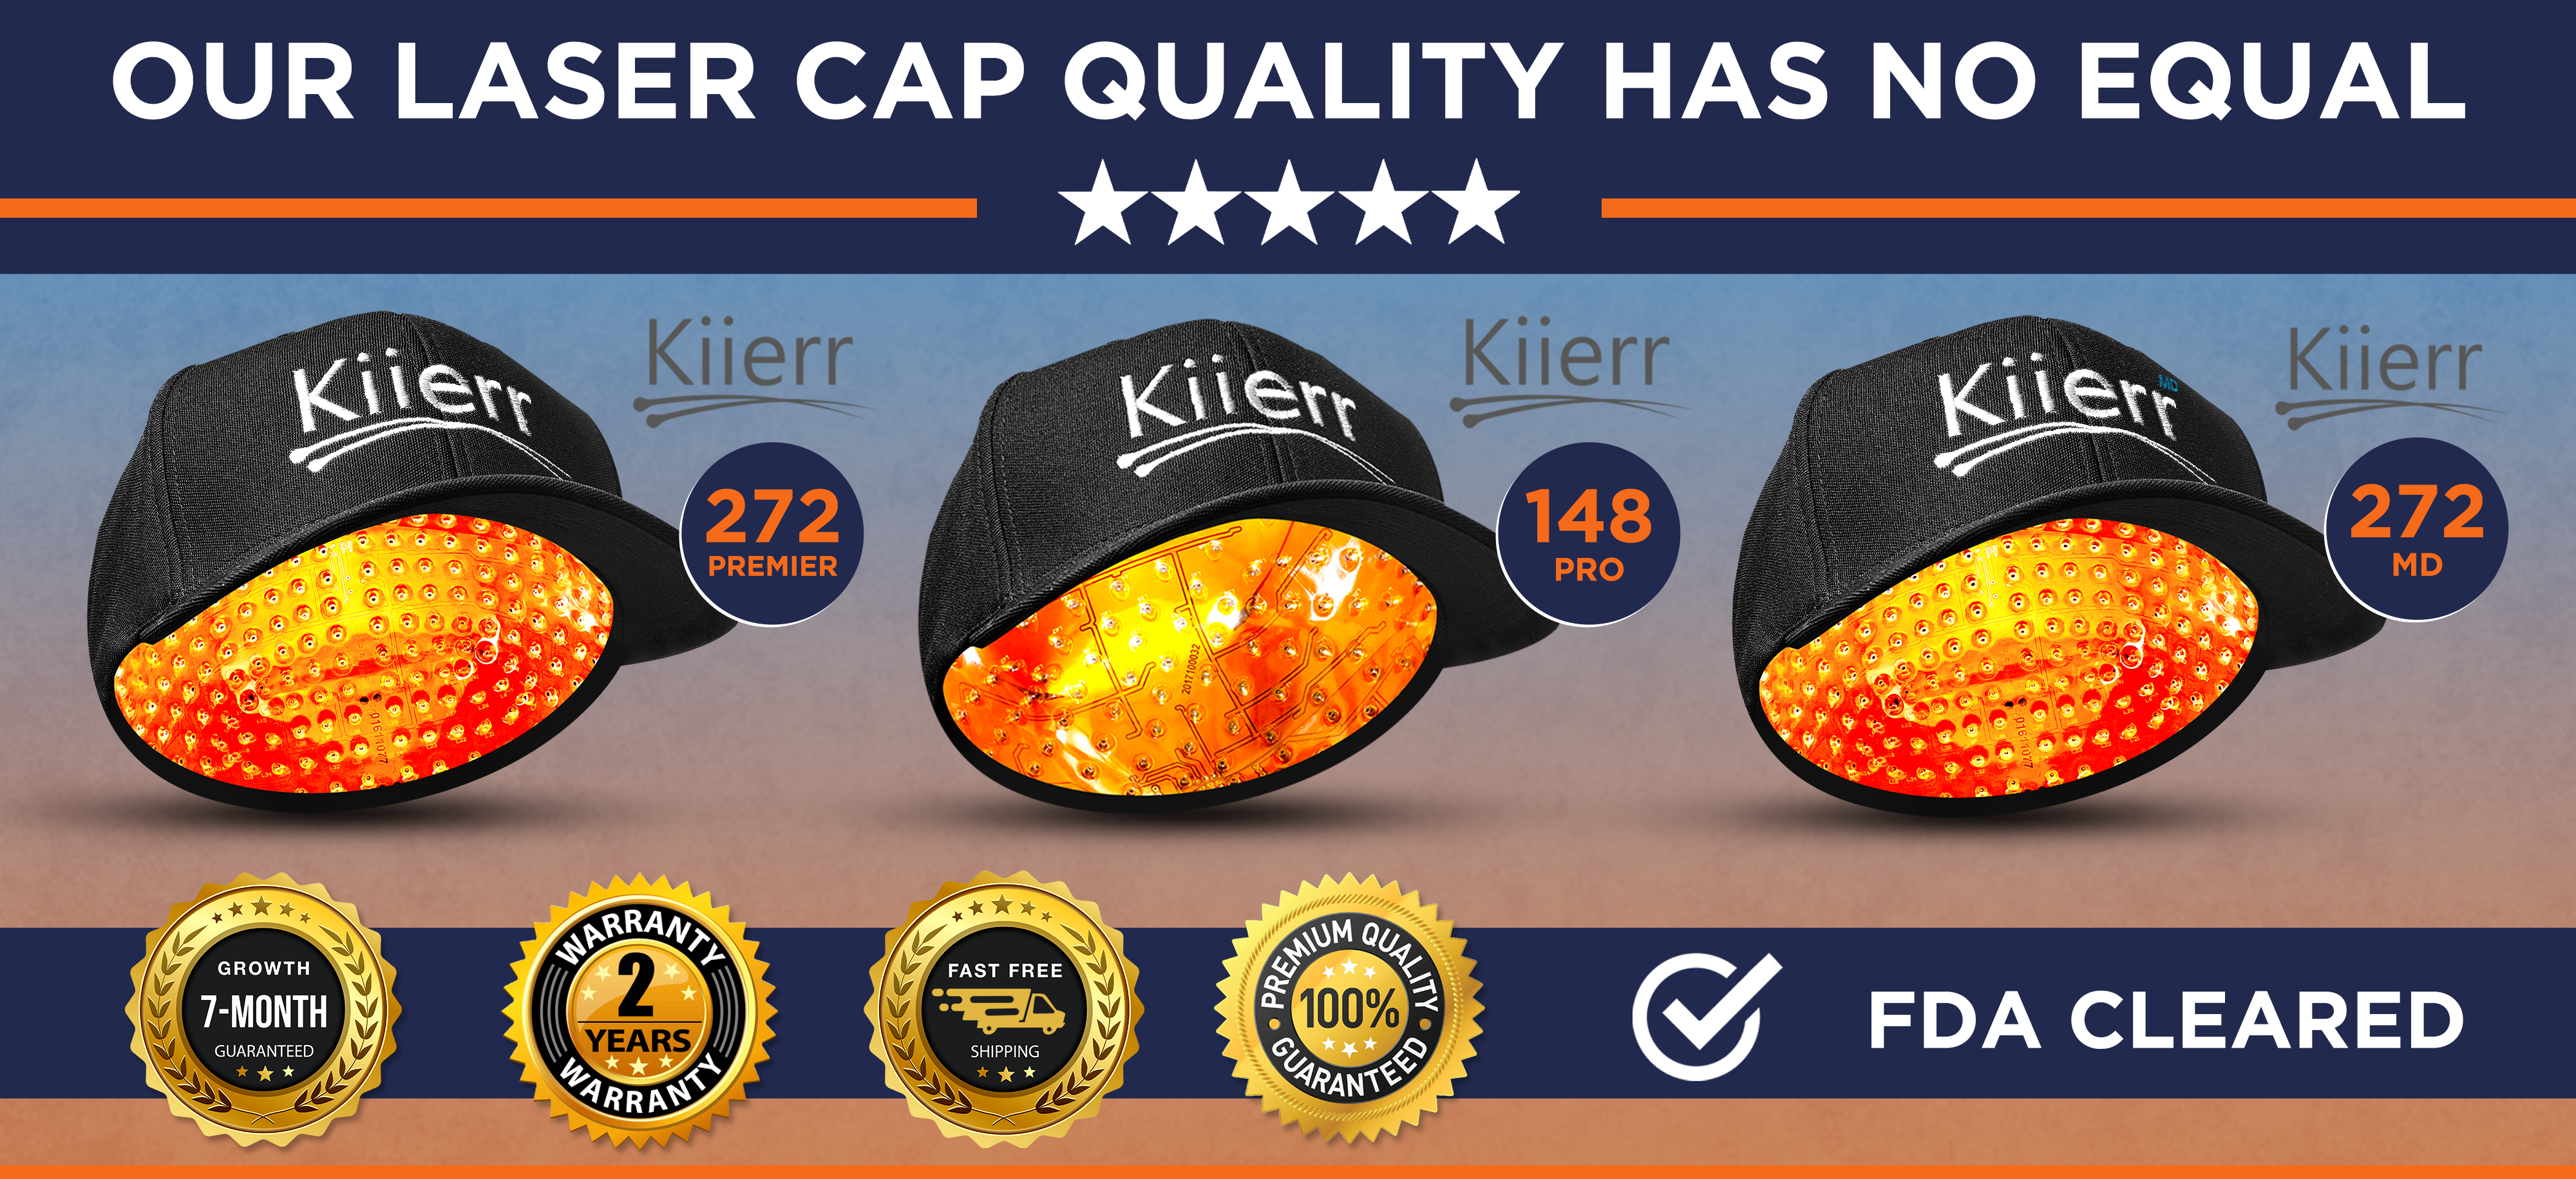 Kiierr Laser Cap Family of Devices FDA Cleared